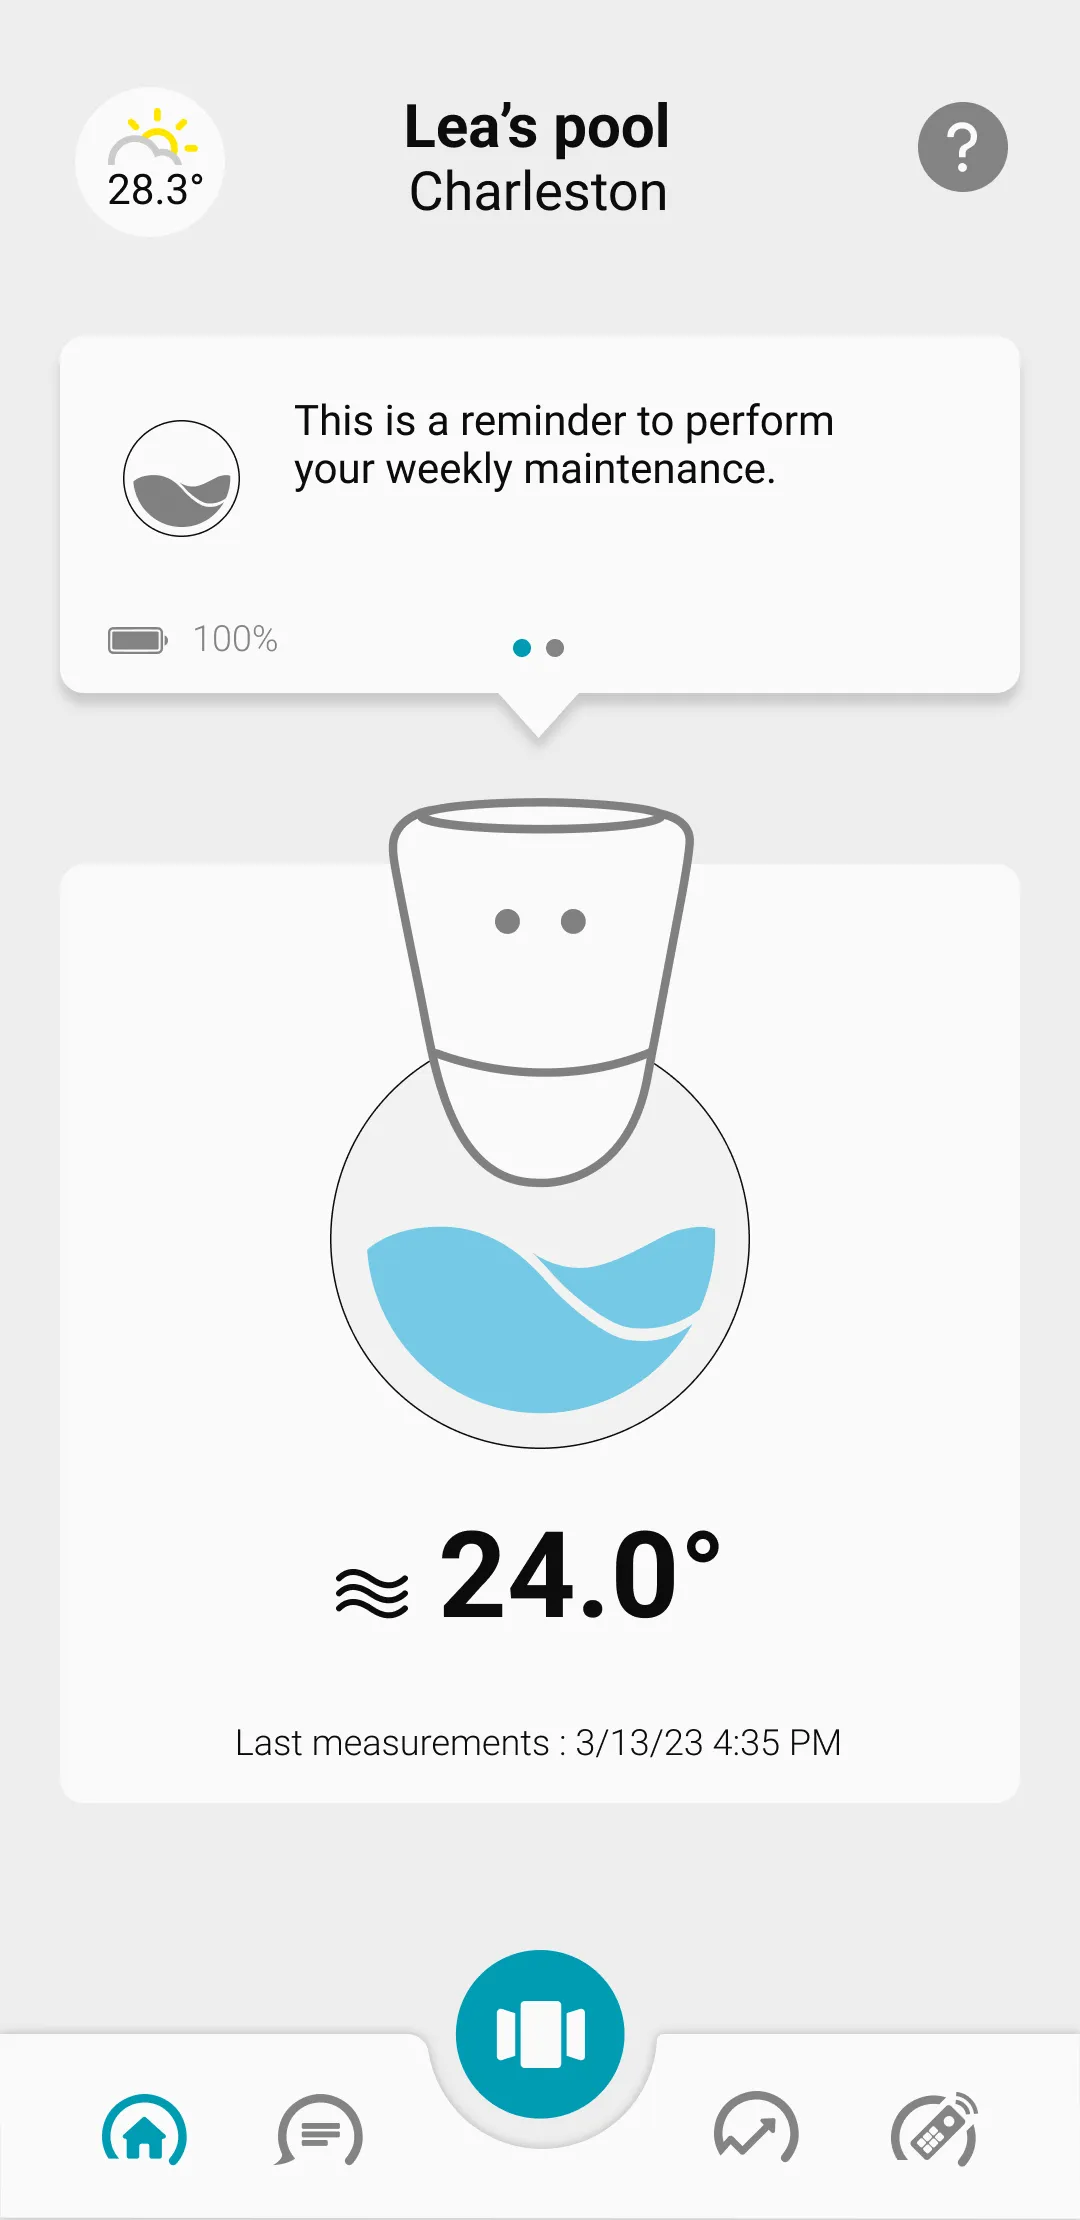 Screen from the ICO POOL mobile application recommending weekly pool maintenance.